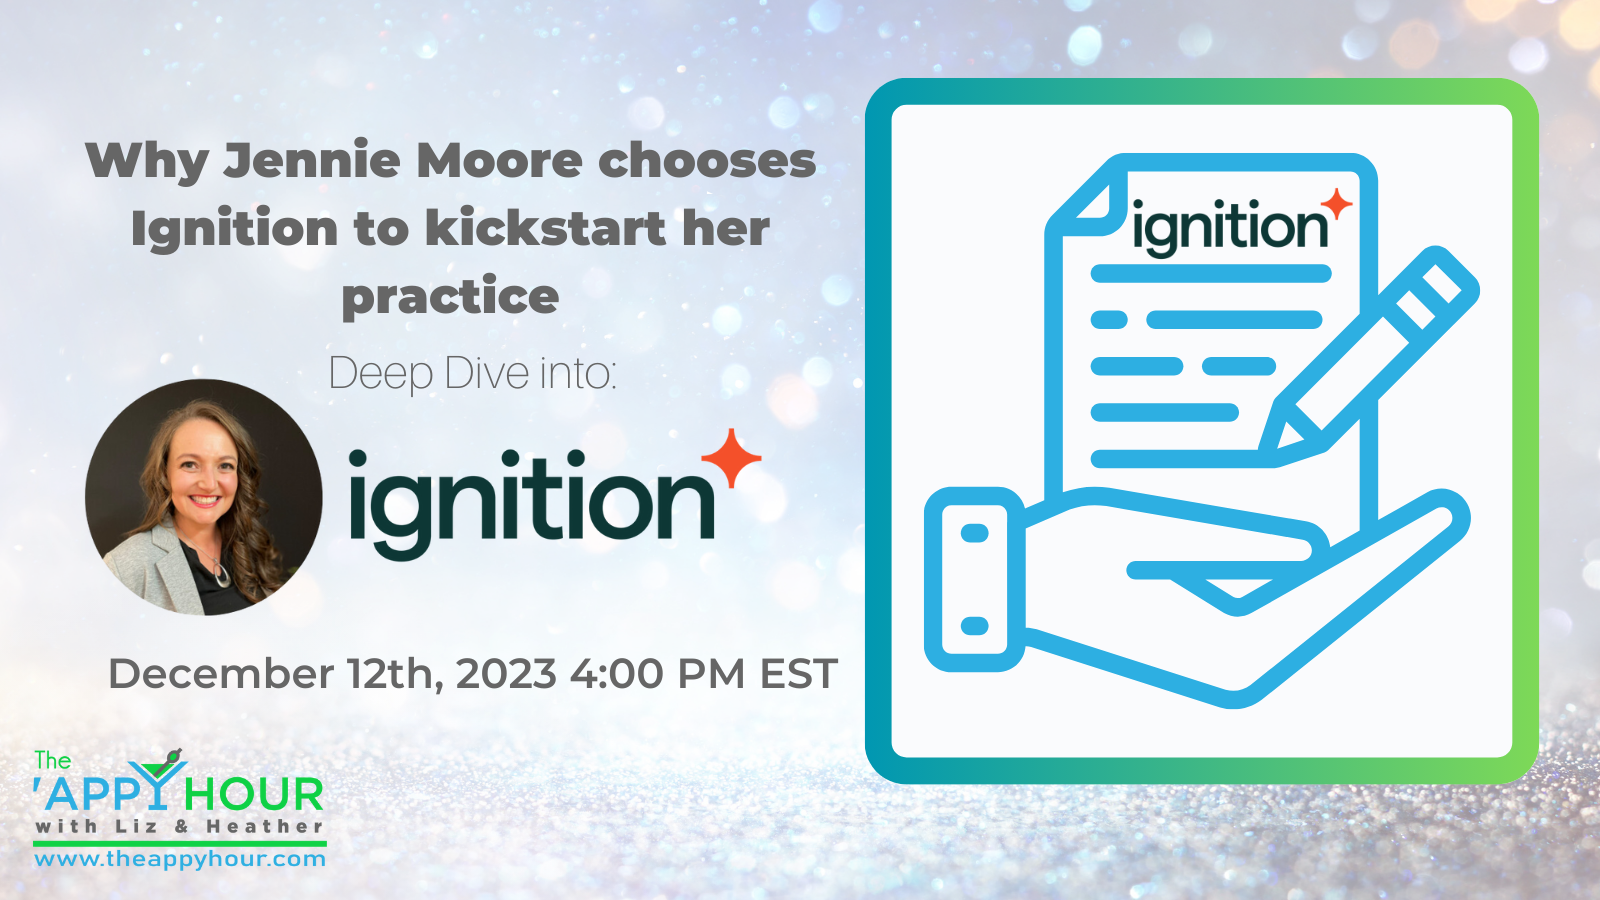 Why Jennie Moore Chooses Ignition To Kickstart Her Practice